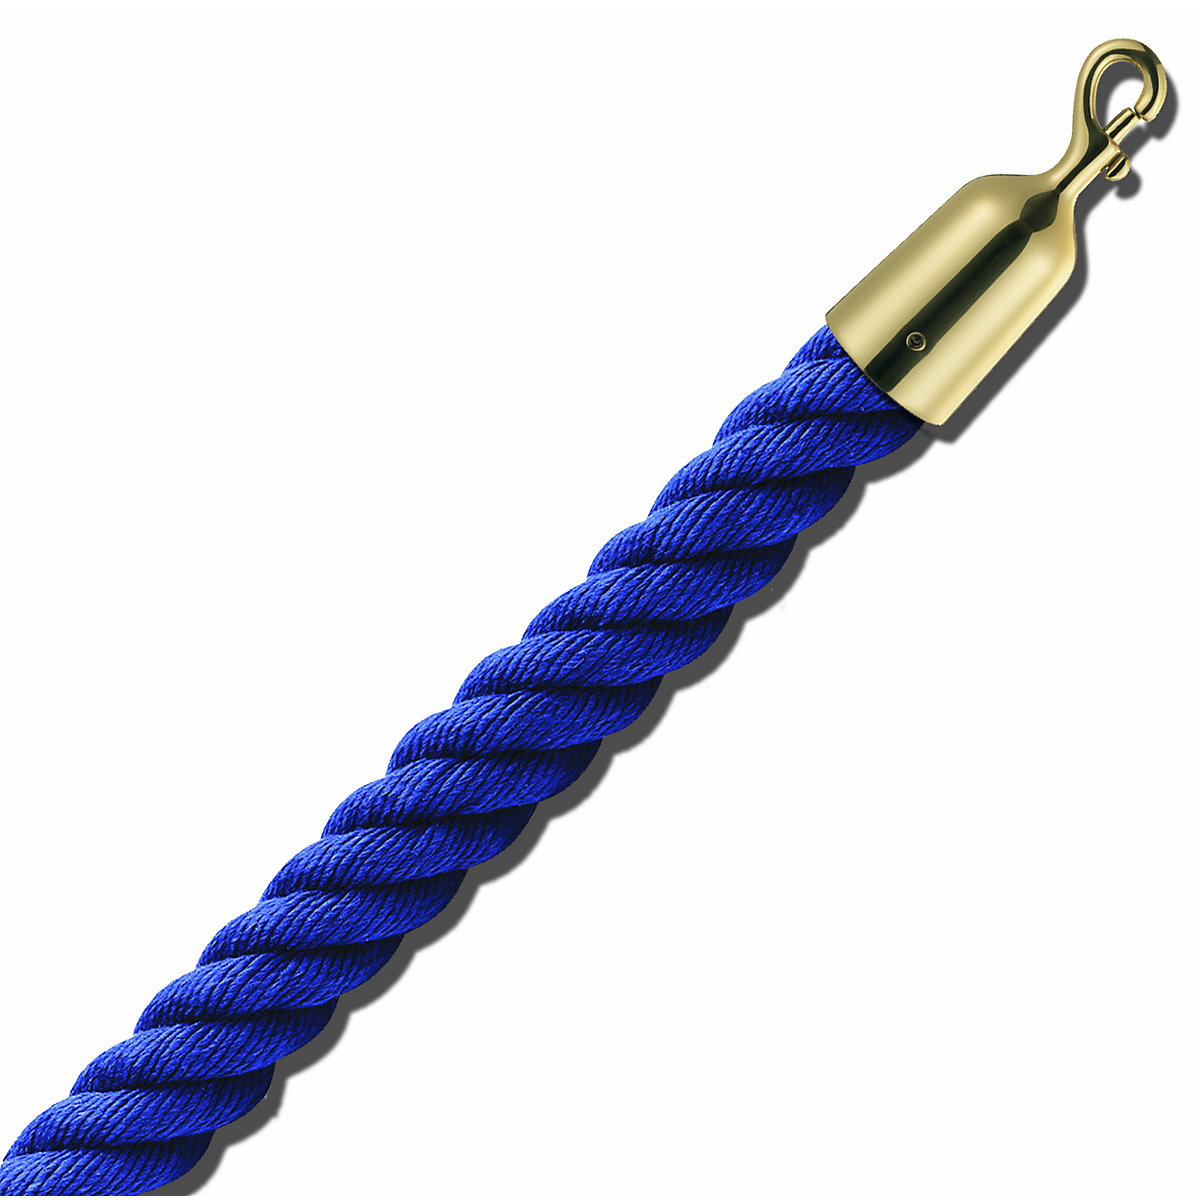 Barrier cord 1.5 m, brass end caps, blue cord-6